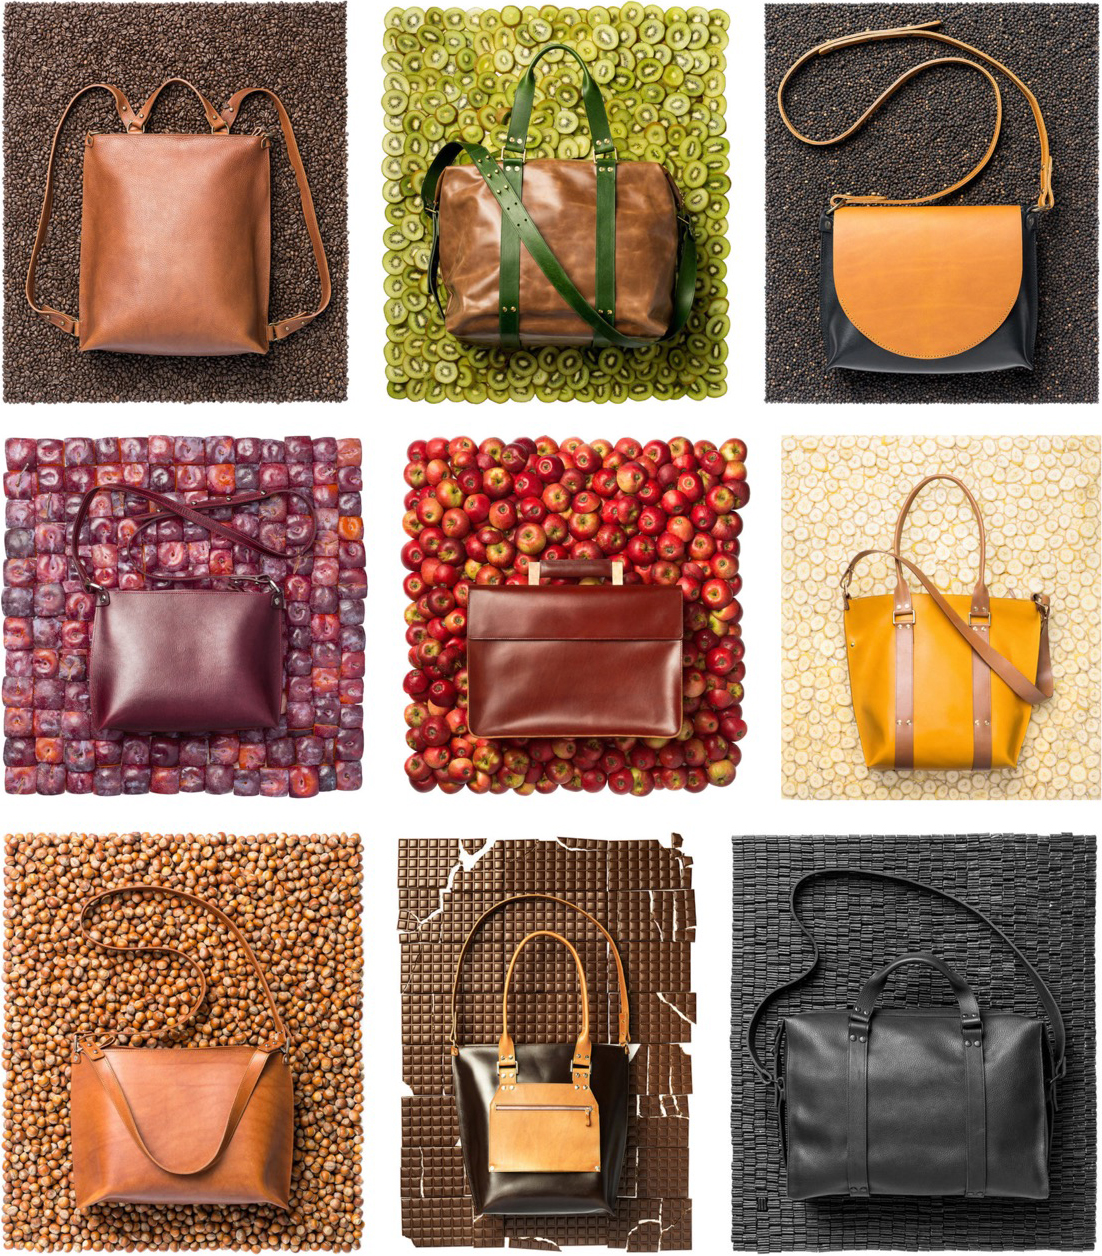 6 leather bags against organic backgrounds